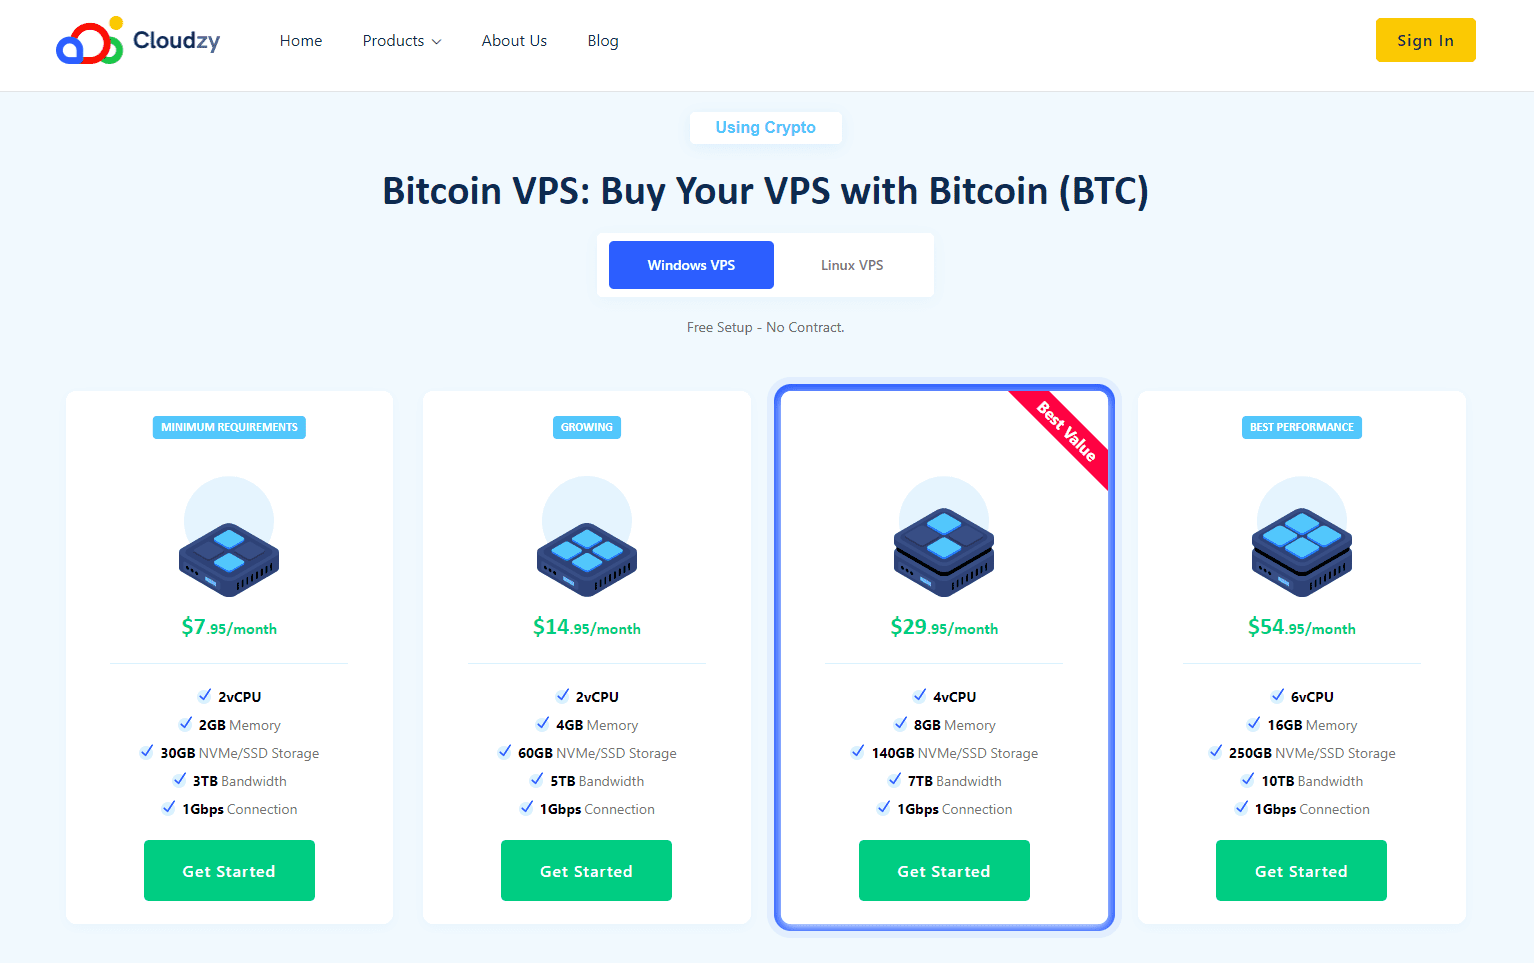 Pay for Cloudzy VPS hosting with bitcoin